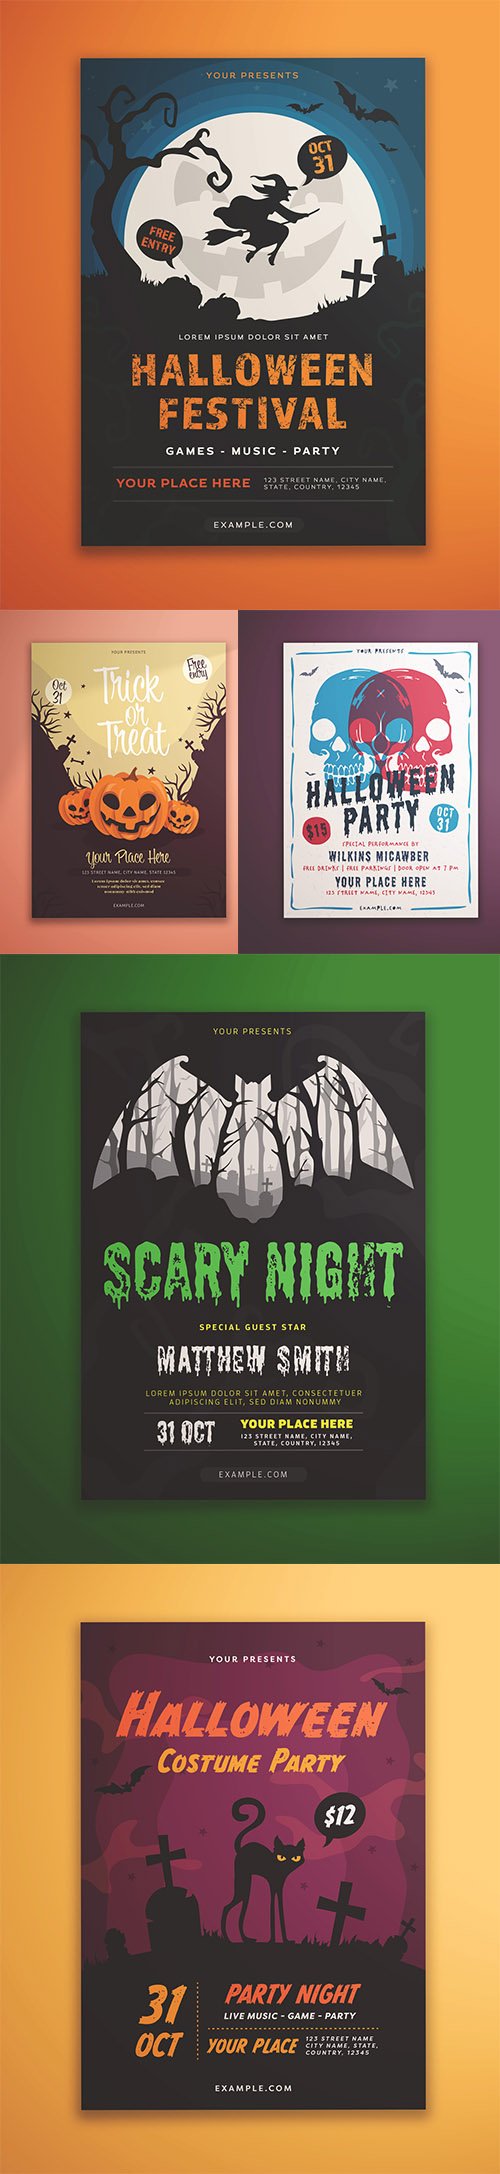 Set of 5 Halloween Flyer Layout with Illustrative Elements